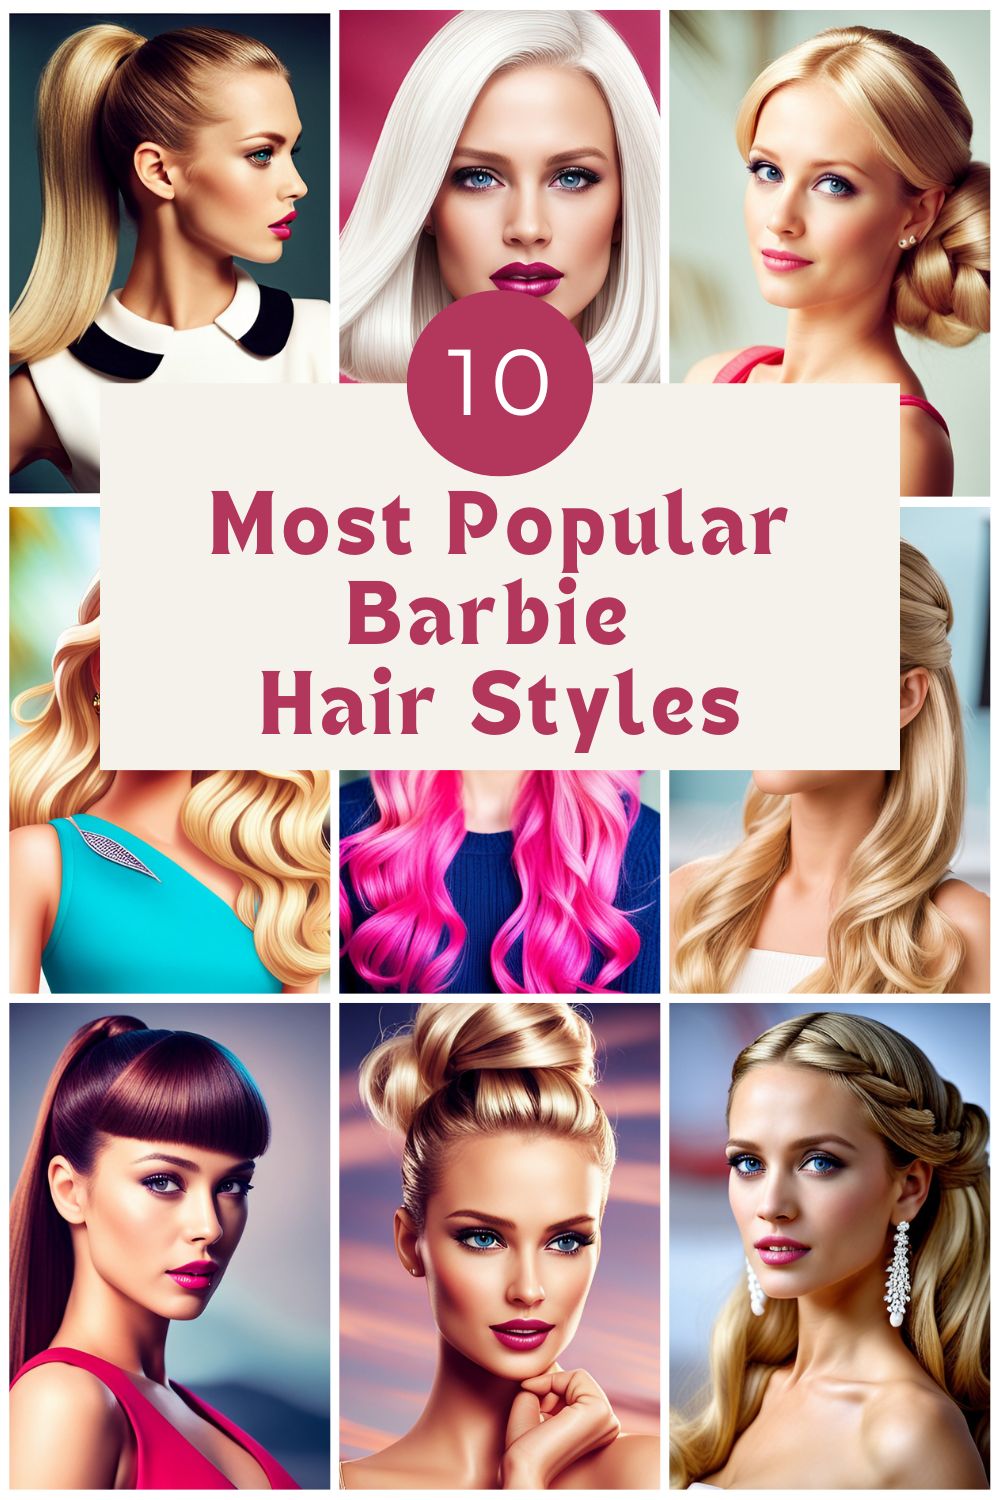 The 10 Most Popular Barbie Hair Styles To Try